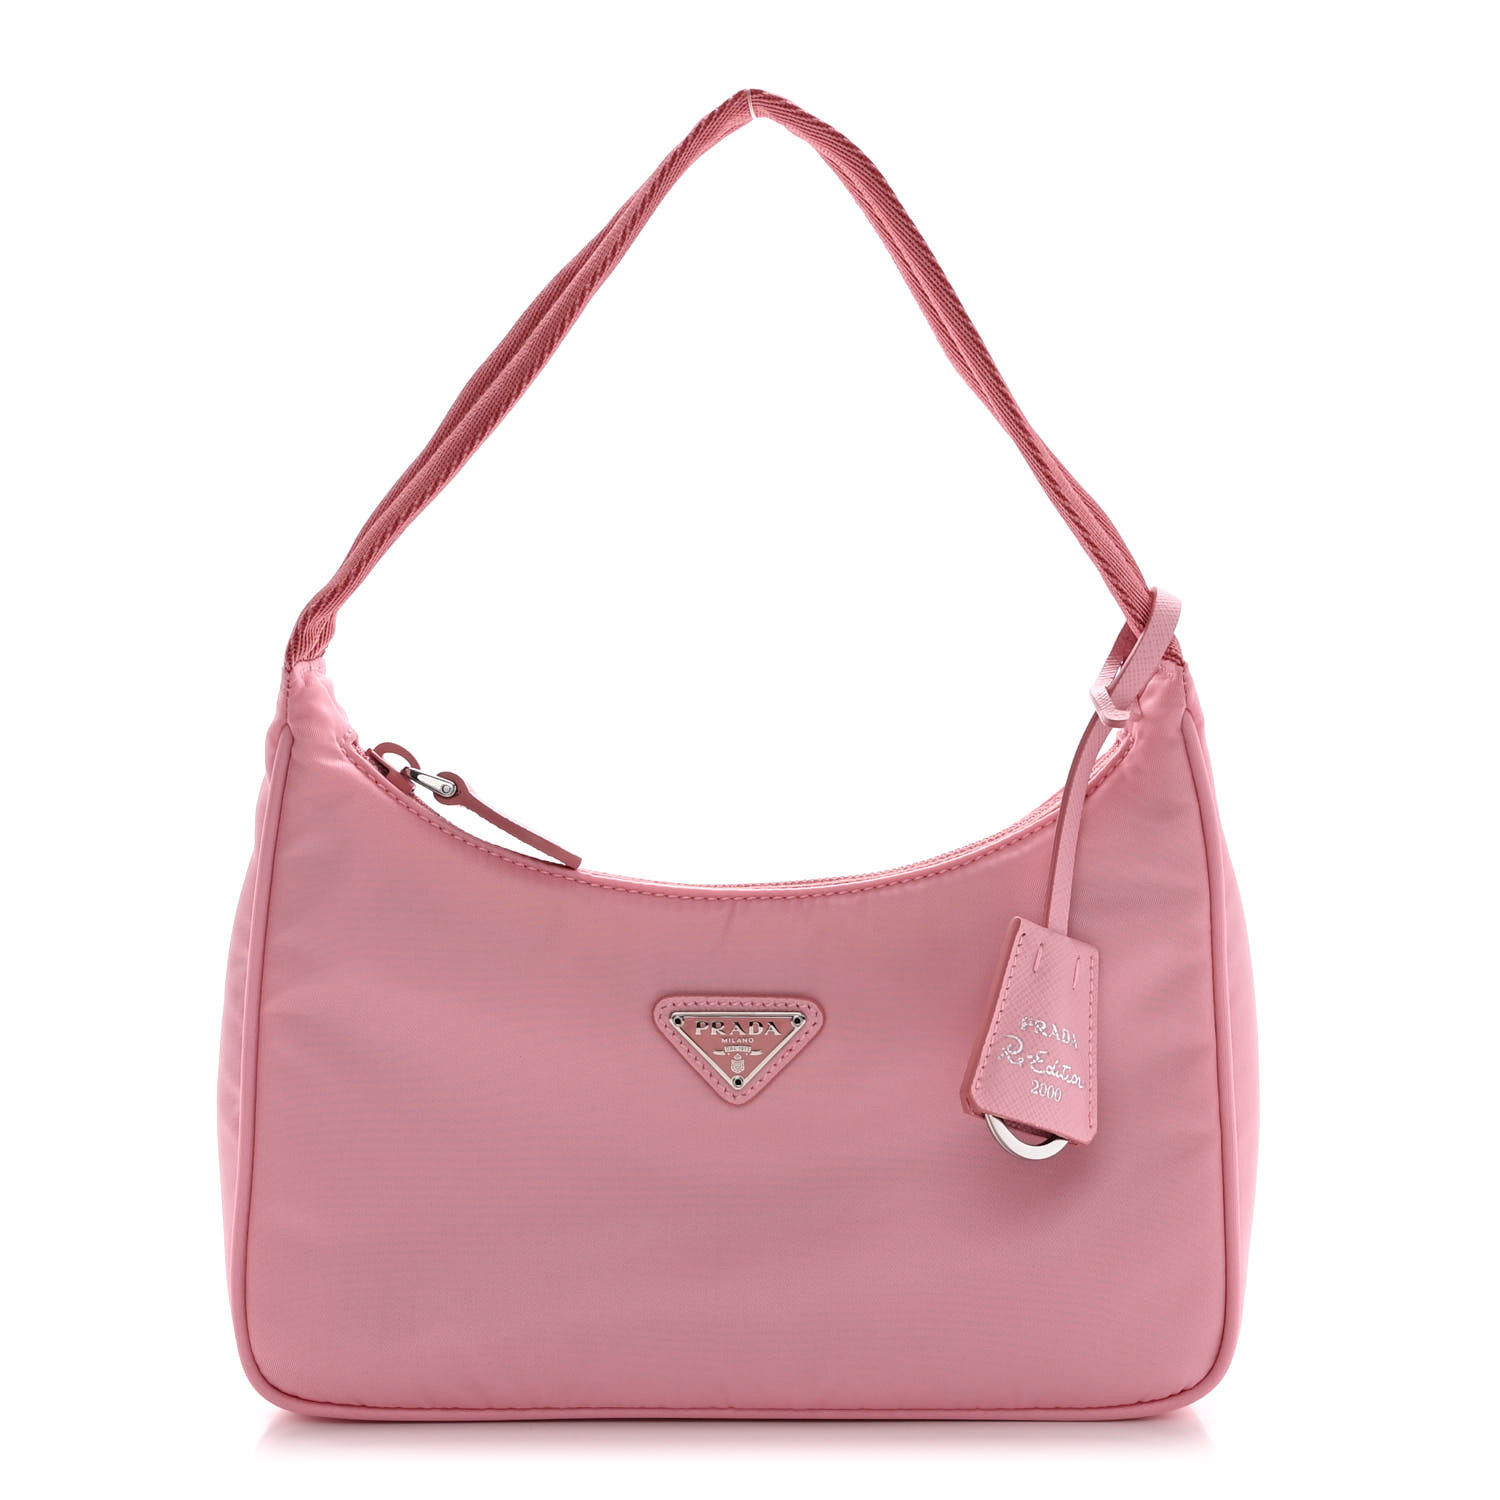 front view image of a PRADA Tessuto Nylon Mini Re-Edition 2000 Bag in the color Rosa by FASHIONPHILE